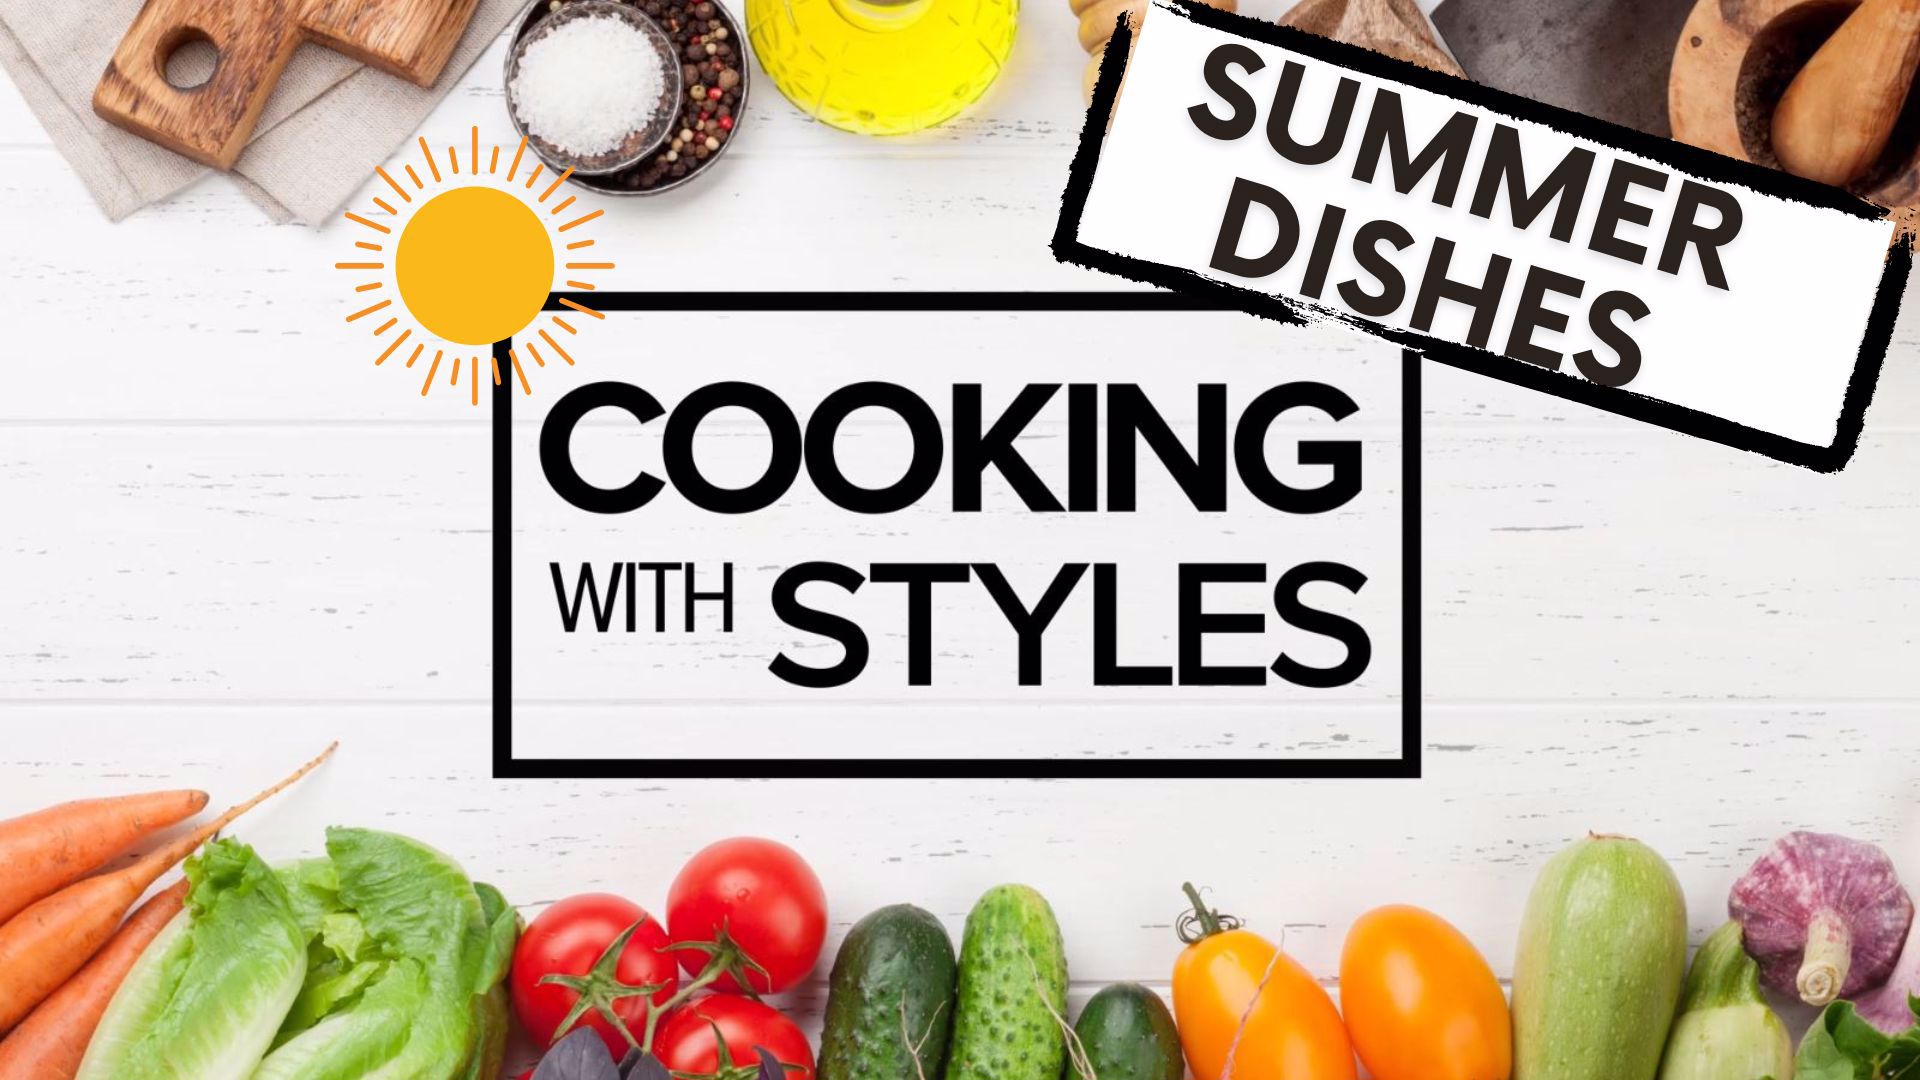 KFMB's Shawn Styles shares some recipes for his summertime favorites, including a grilled margherita pesto pizza, bruschetta, asian slaw, caprese salad and more.